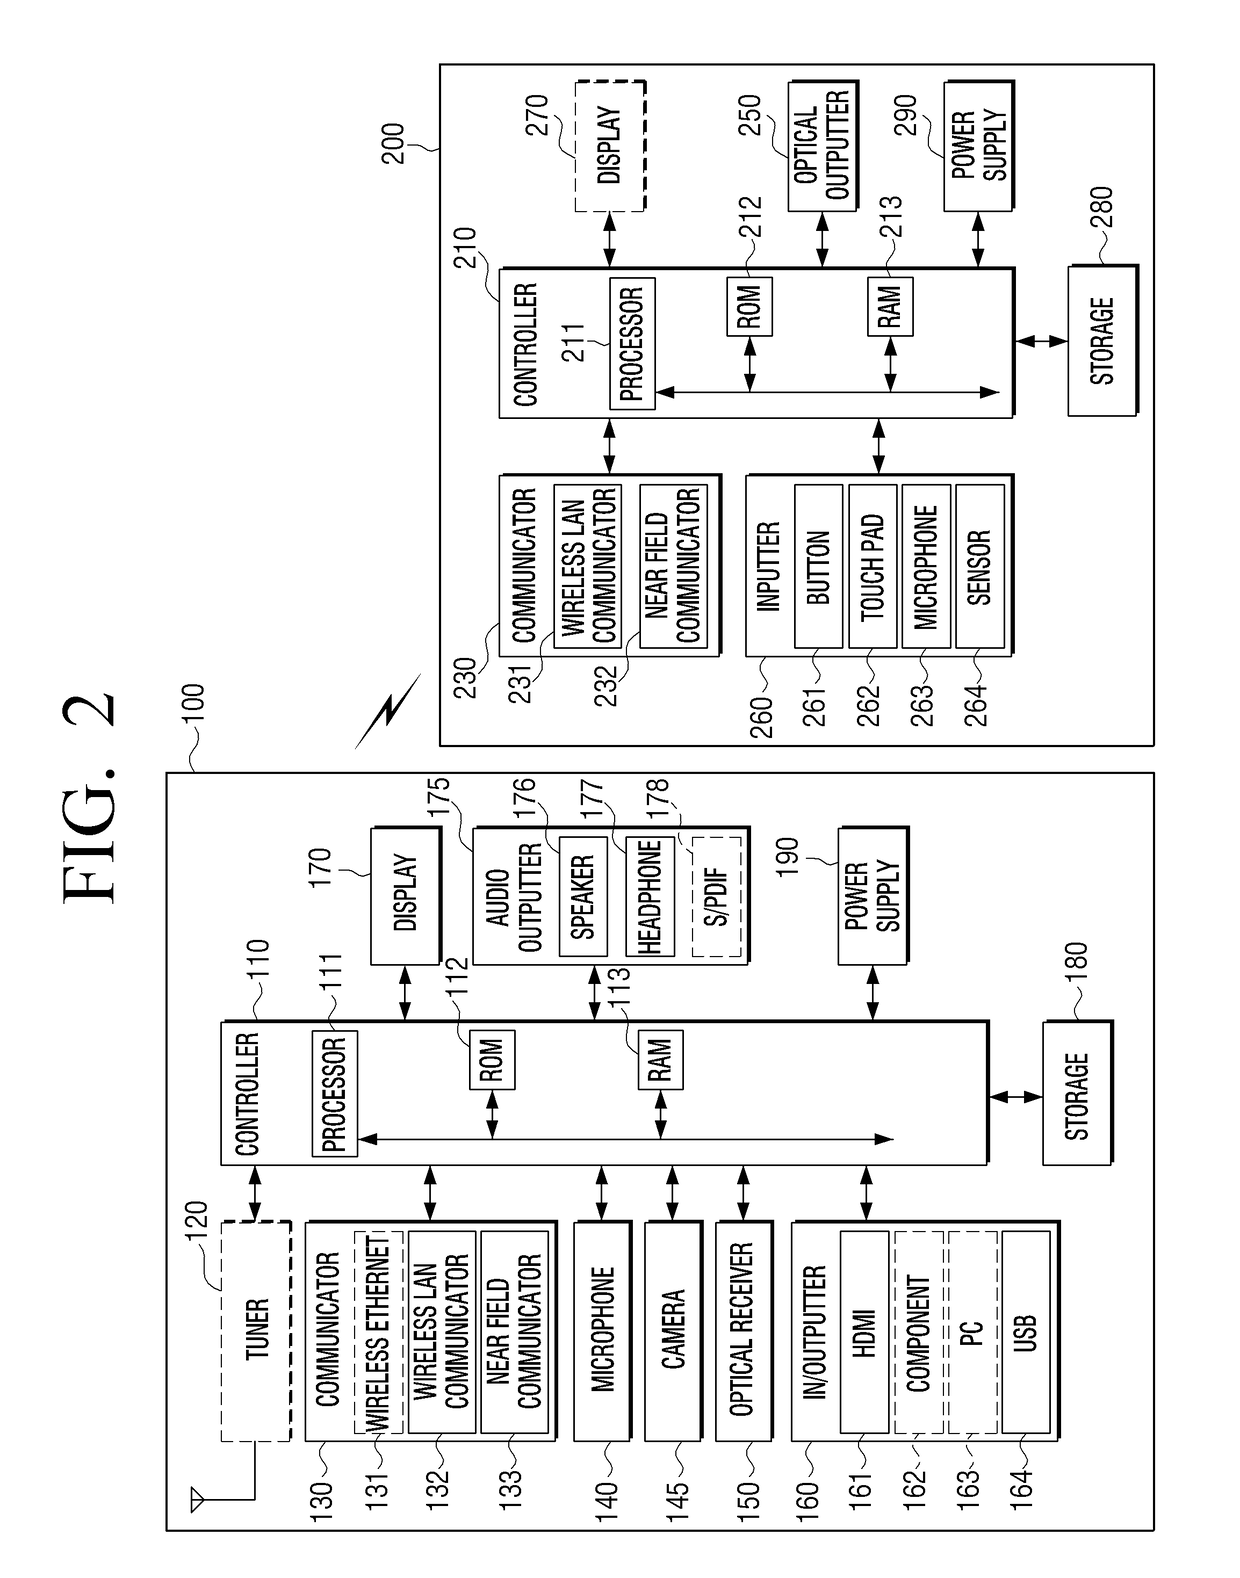 Display apparatus and method for controlling display of display apparatus